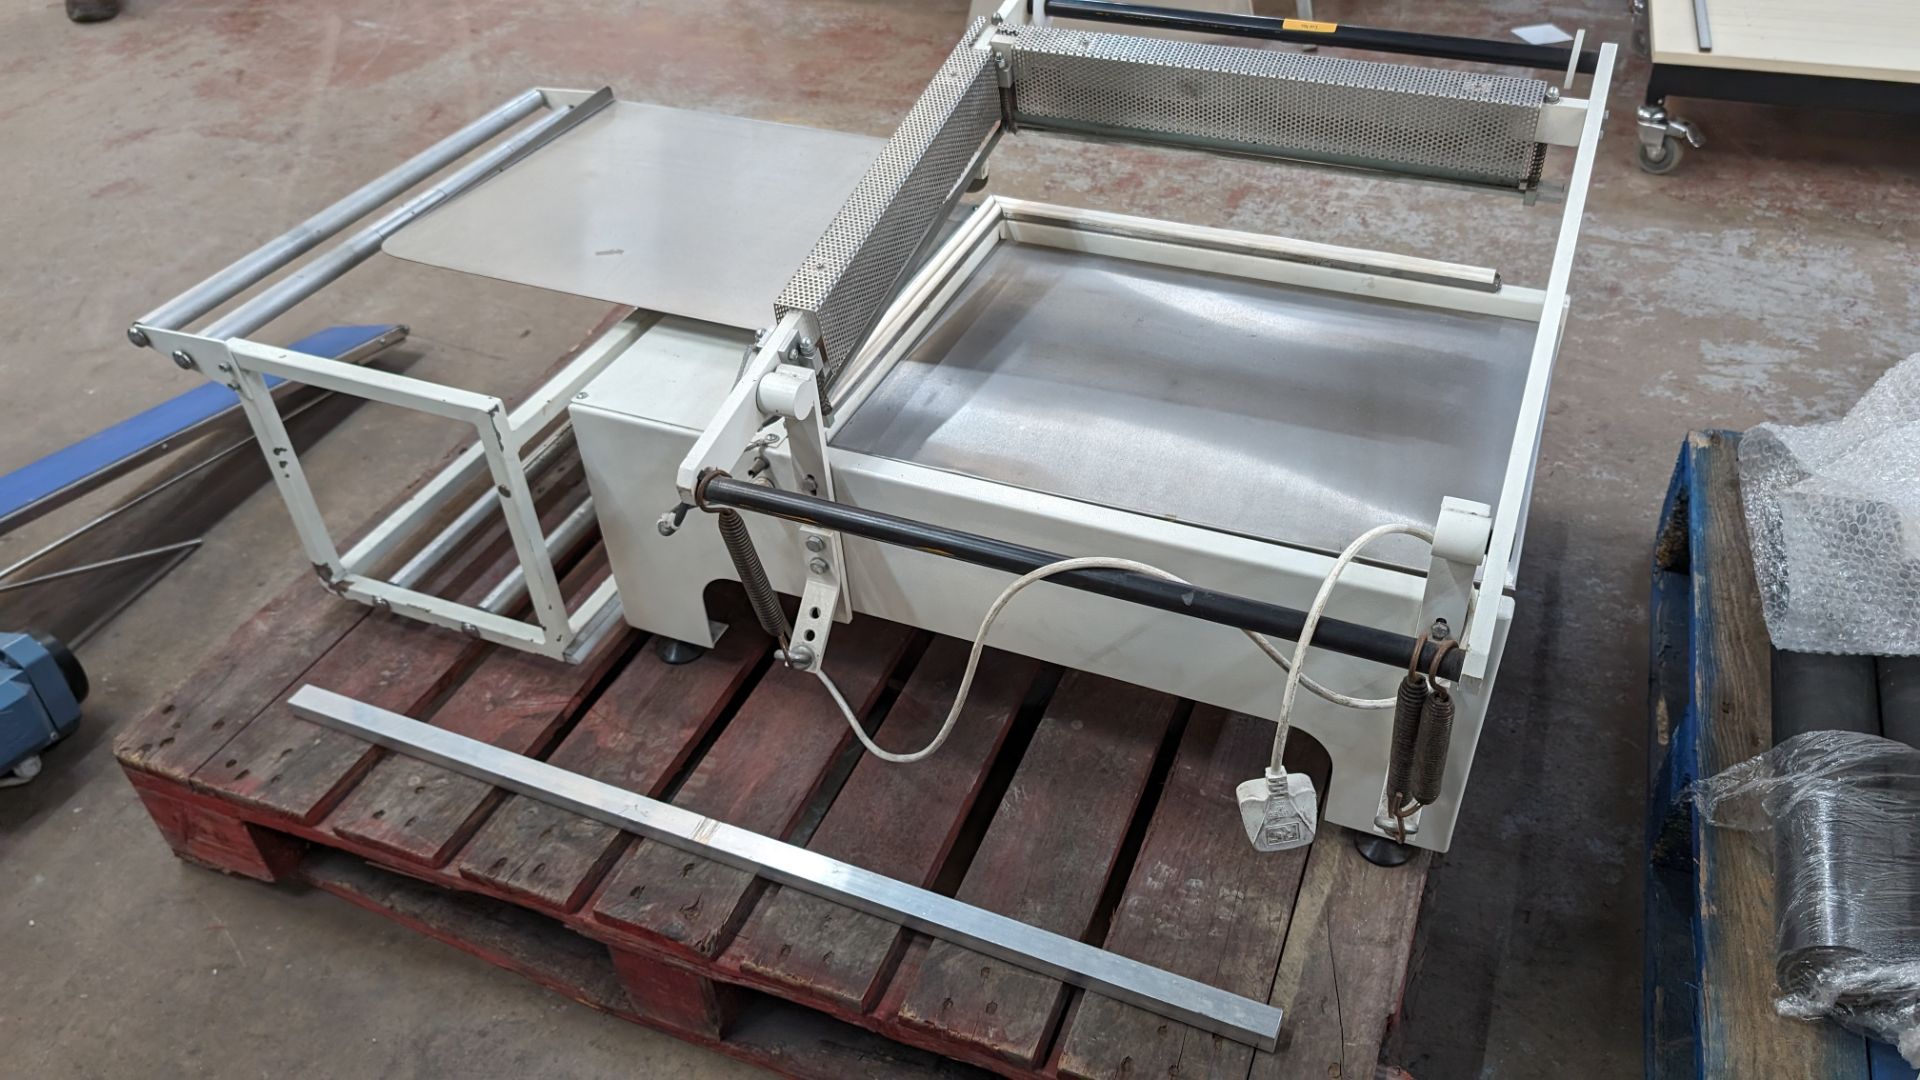 Packaging/shrink wrapping machine - possibly incomplete - Image 8 of 9